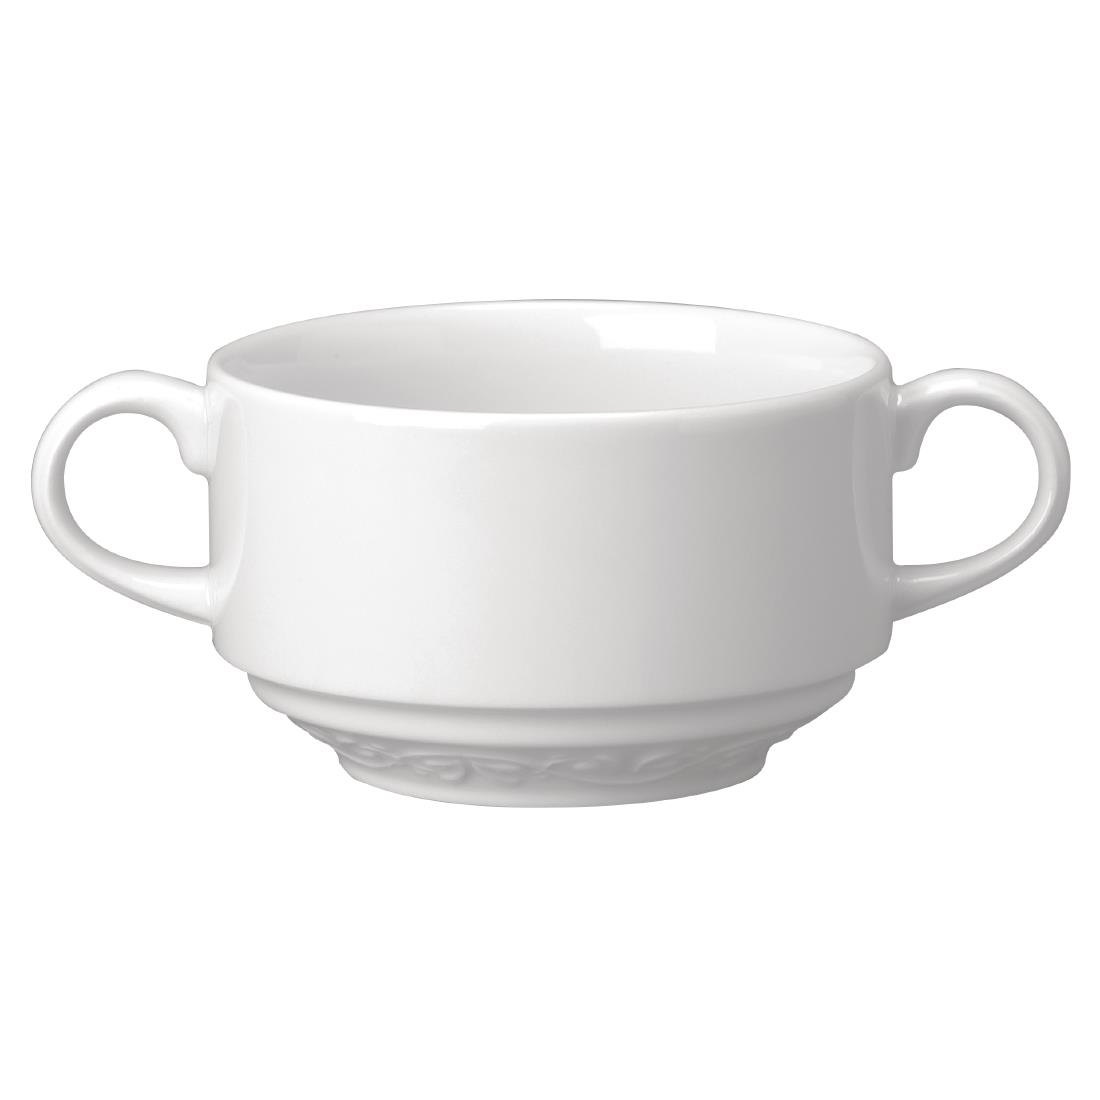 Churchill Chateau Blanc Handled Consomme Bowls 280ml (Pack of 12)